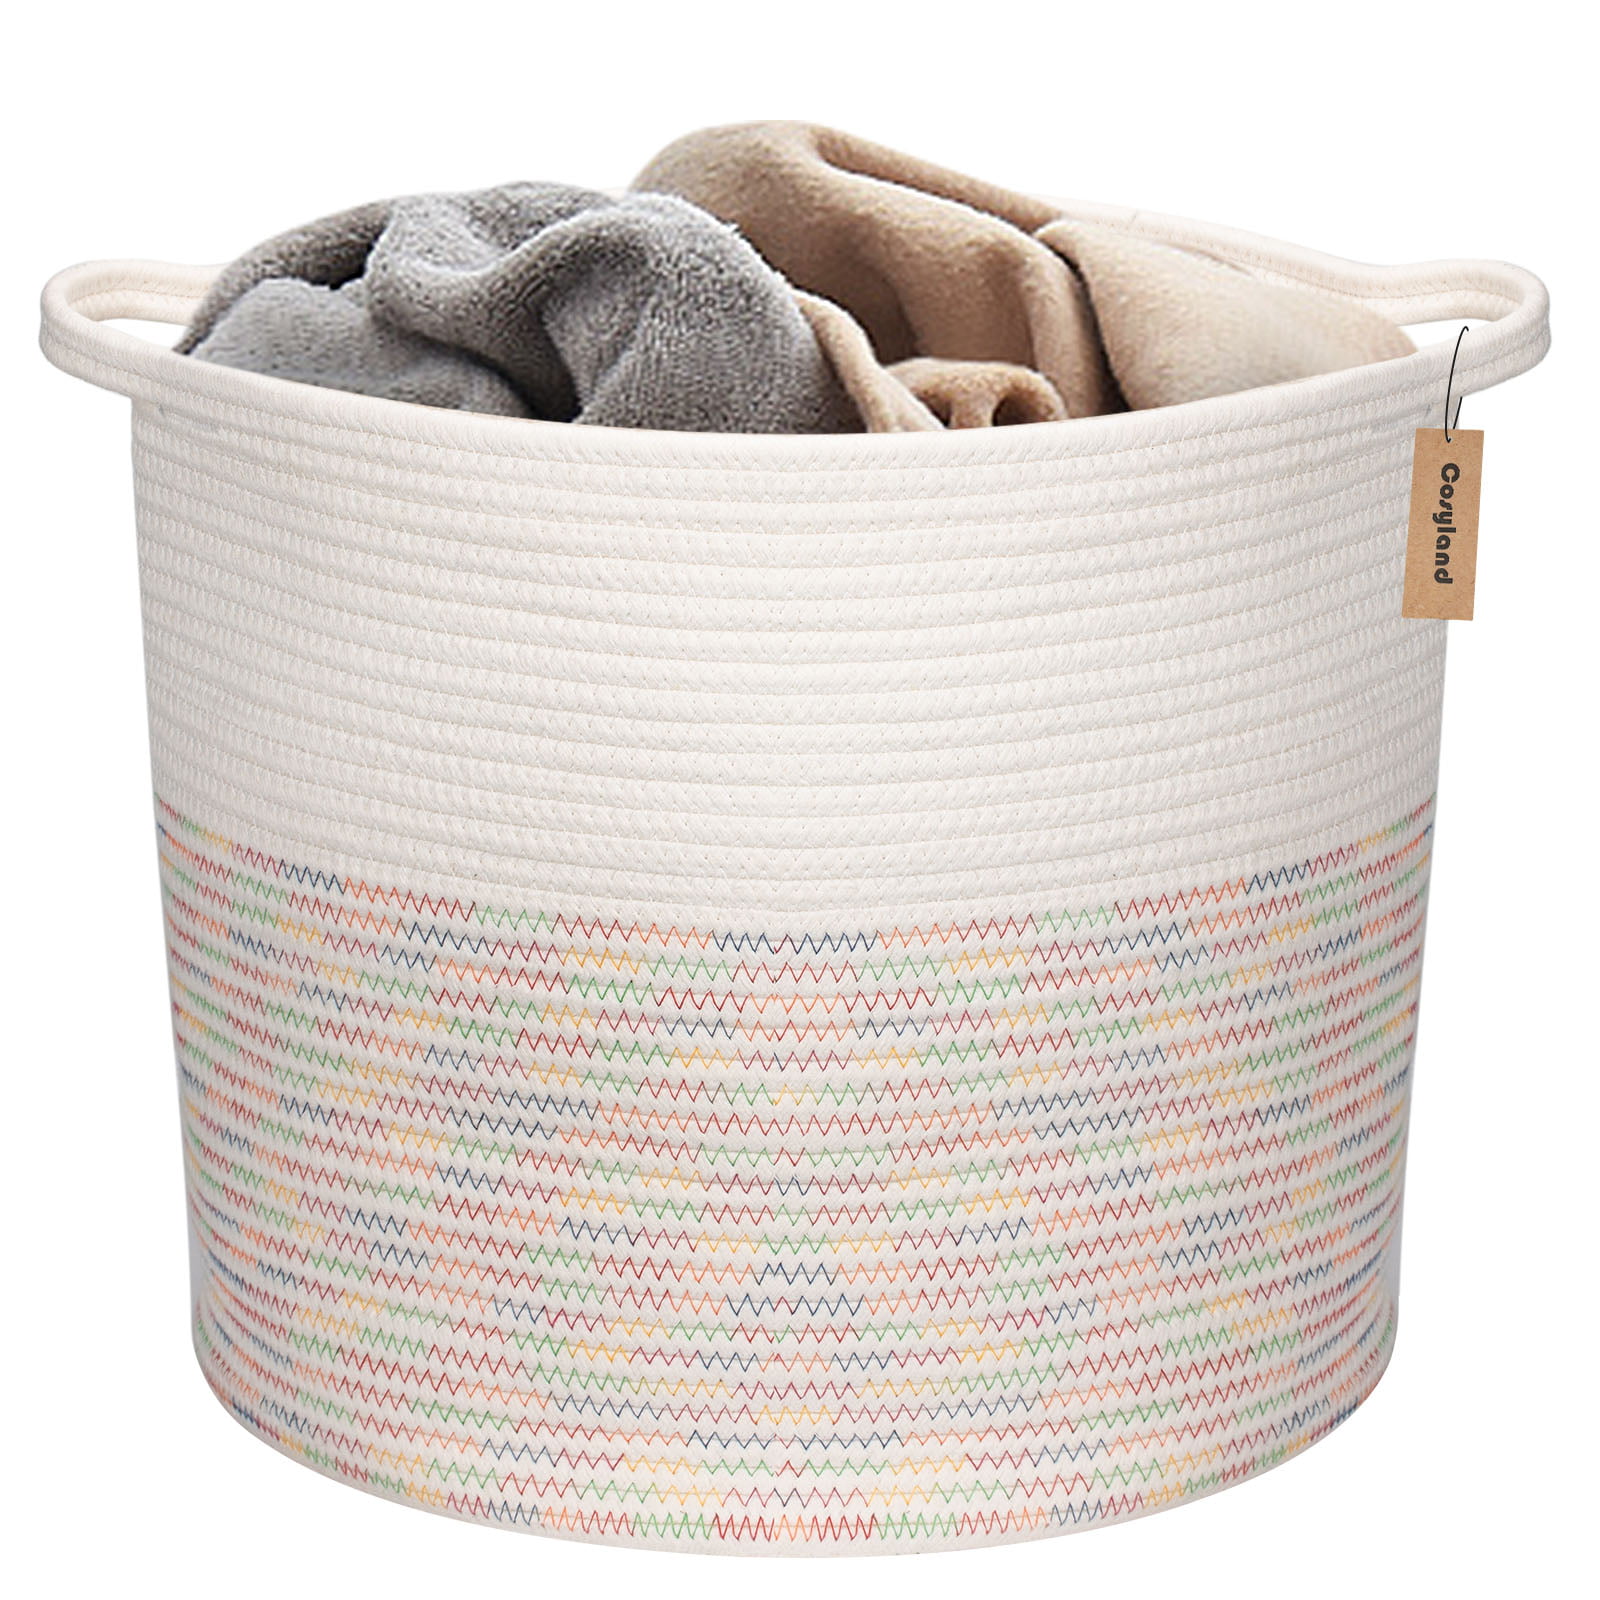 White, L Cotton Rope Storage Basket Collapsible Laundry Hamper Nursery Woven Storage Bin Container Organizer with Handles 